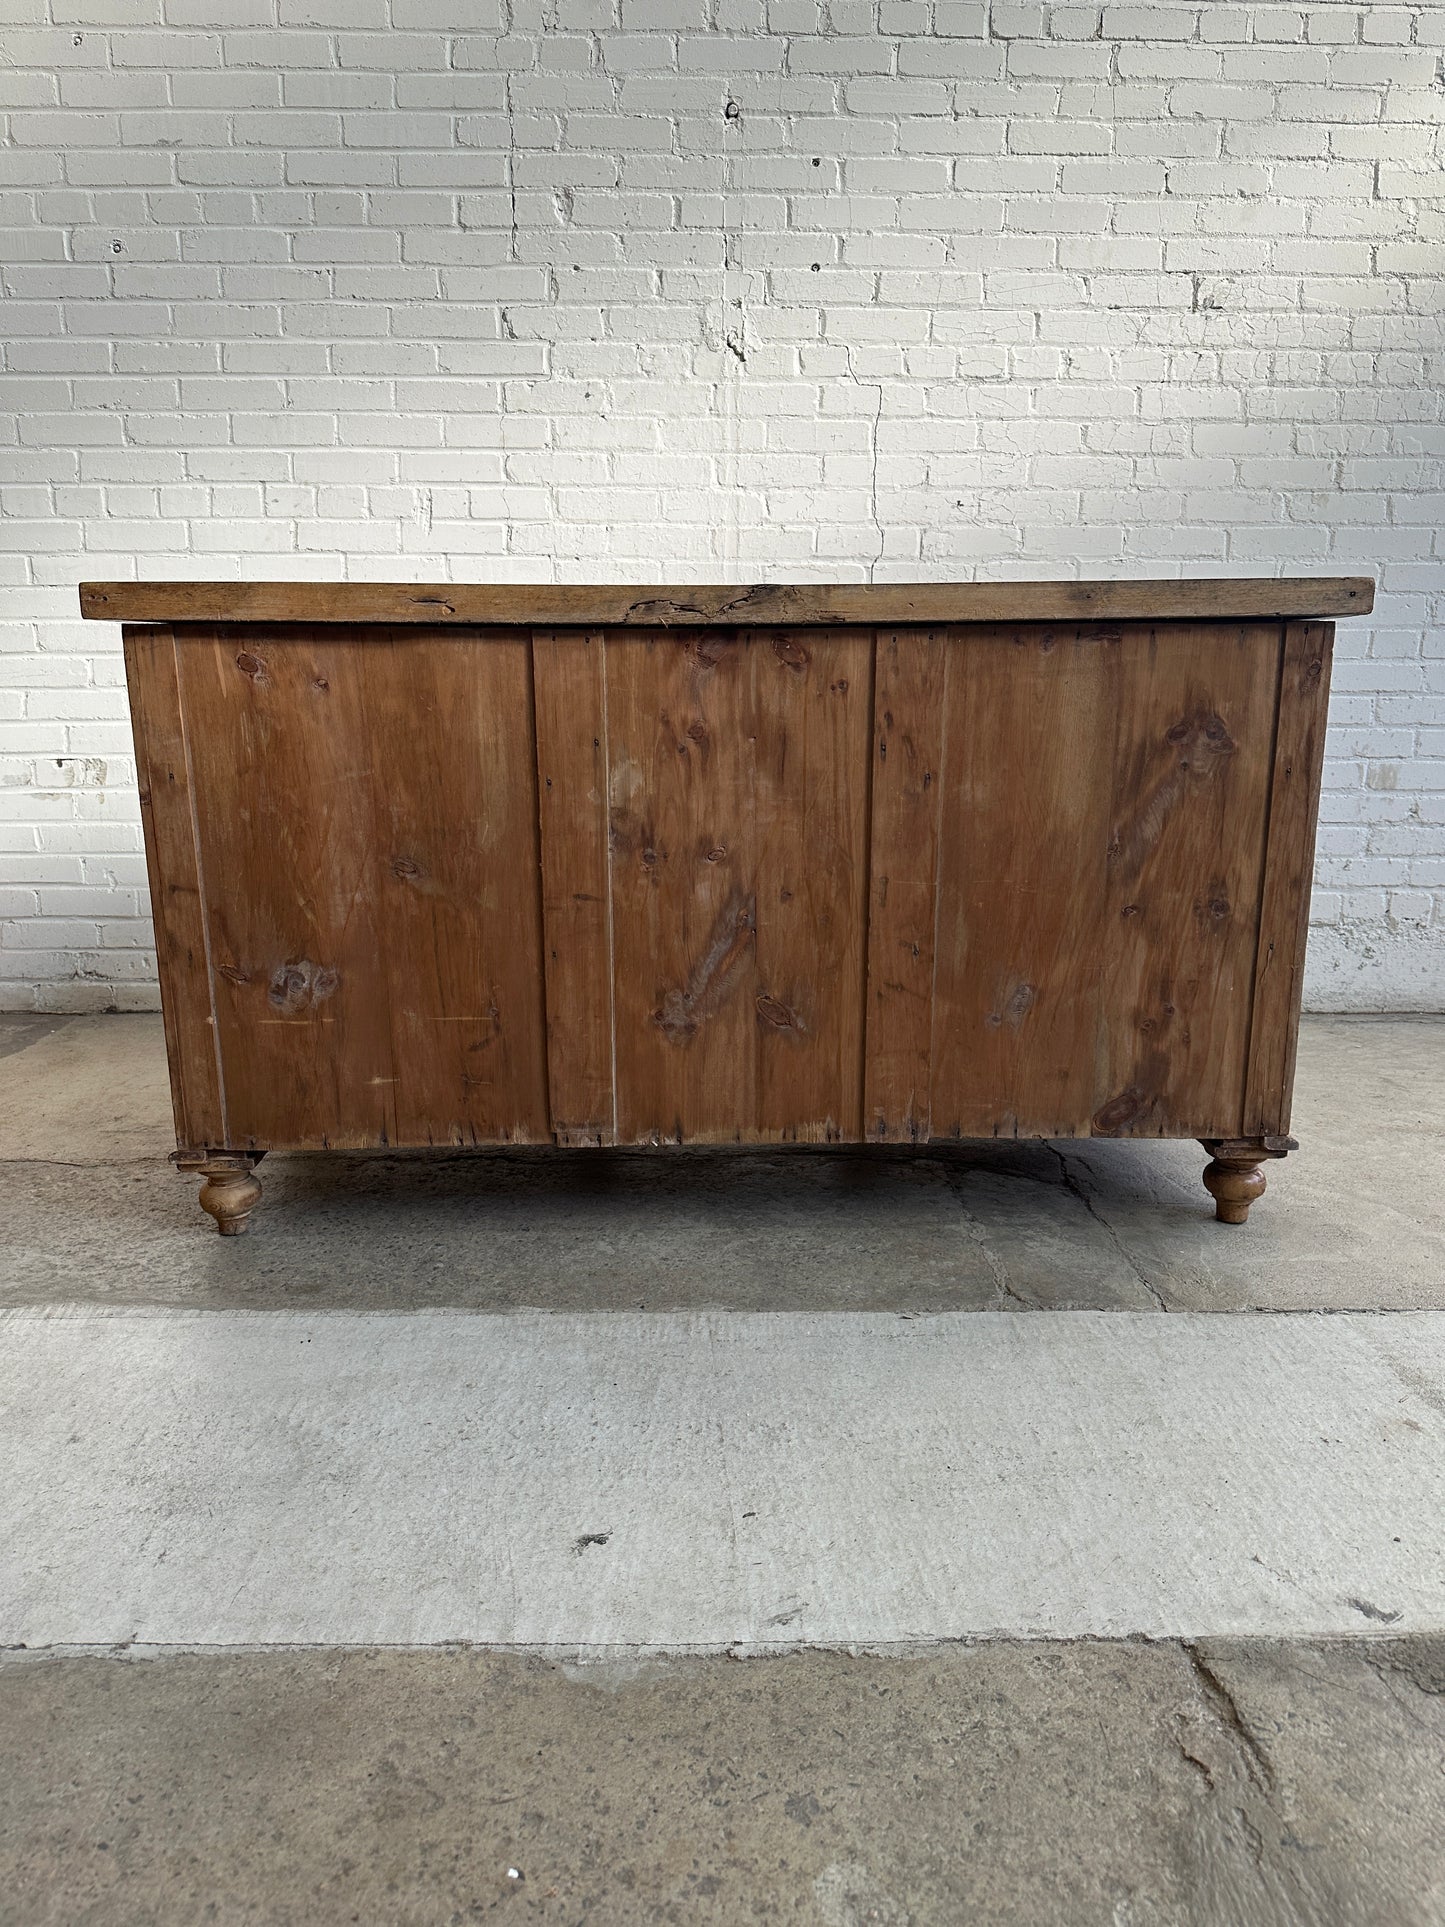 Antique Pine and Sycamore English Sideboard c. 1875